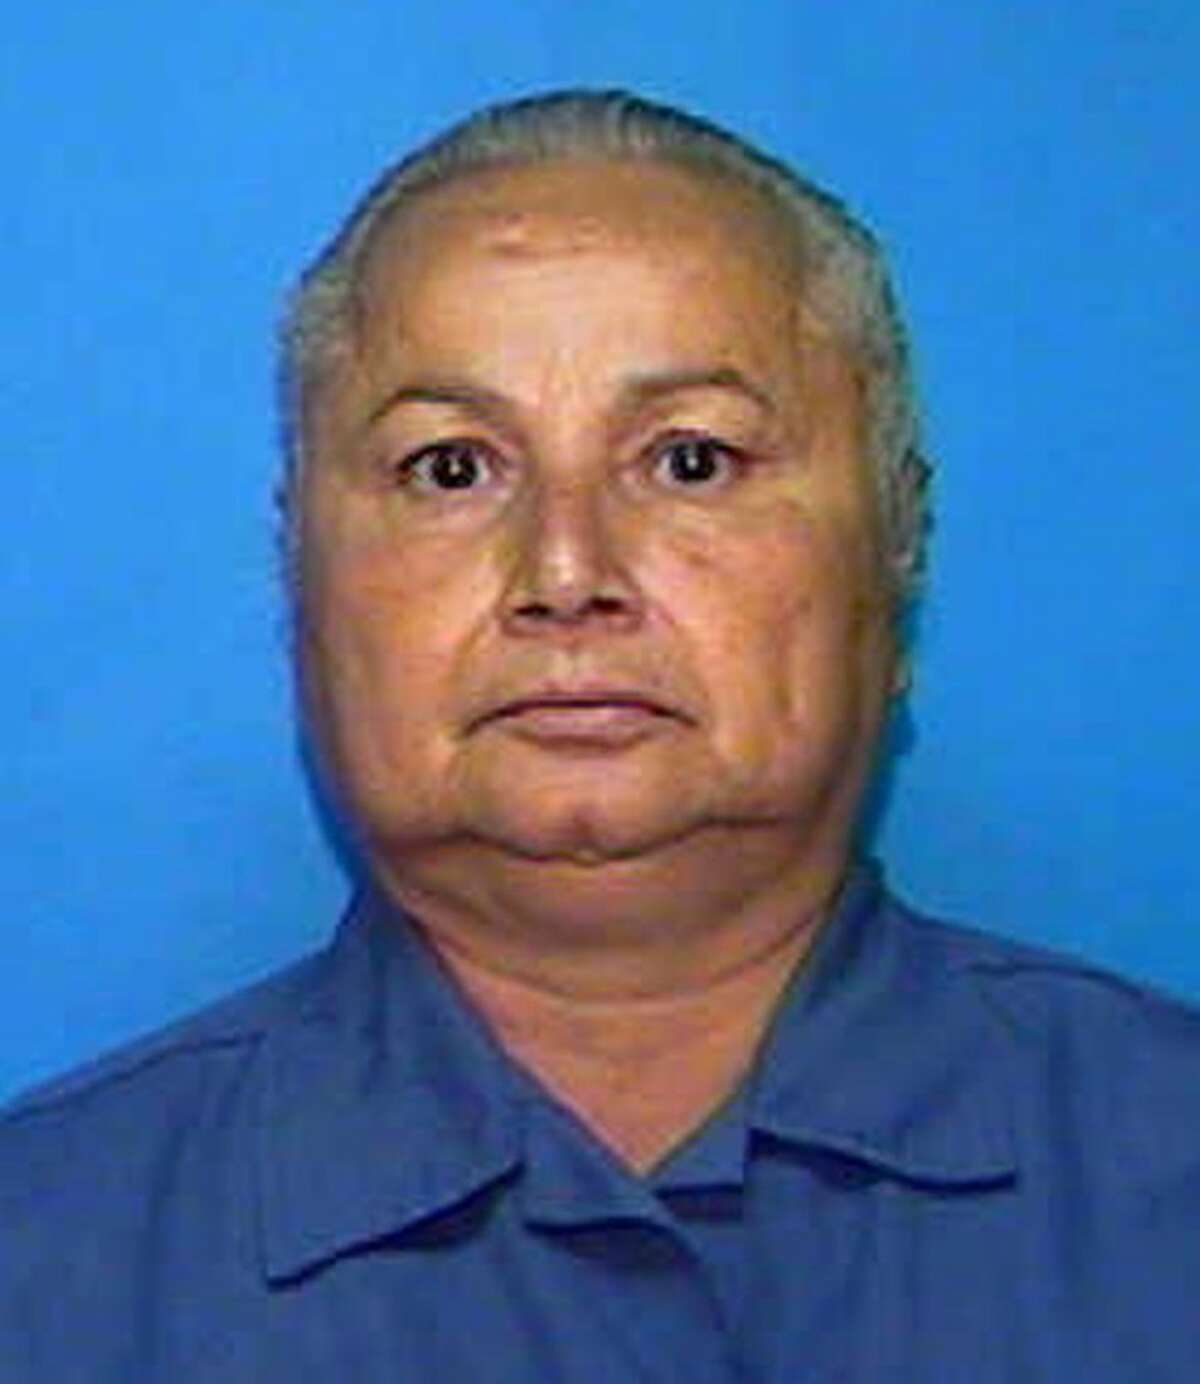 This undated Florida Department of Corrections booking mug shows Griselda Blanco. Blanco, a convicted drug trafficker who was once known as the “Godmother” and the “Queen of Cocaine,” has been shot to death by an unidentified gunman, police in Colombia said Tuesday.